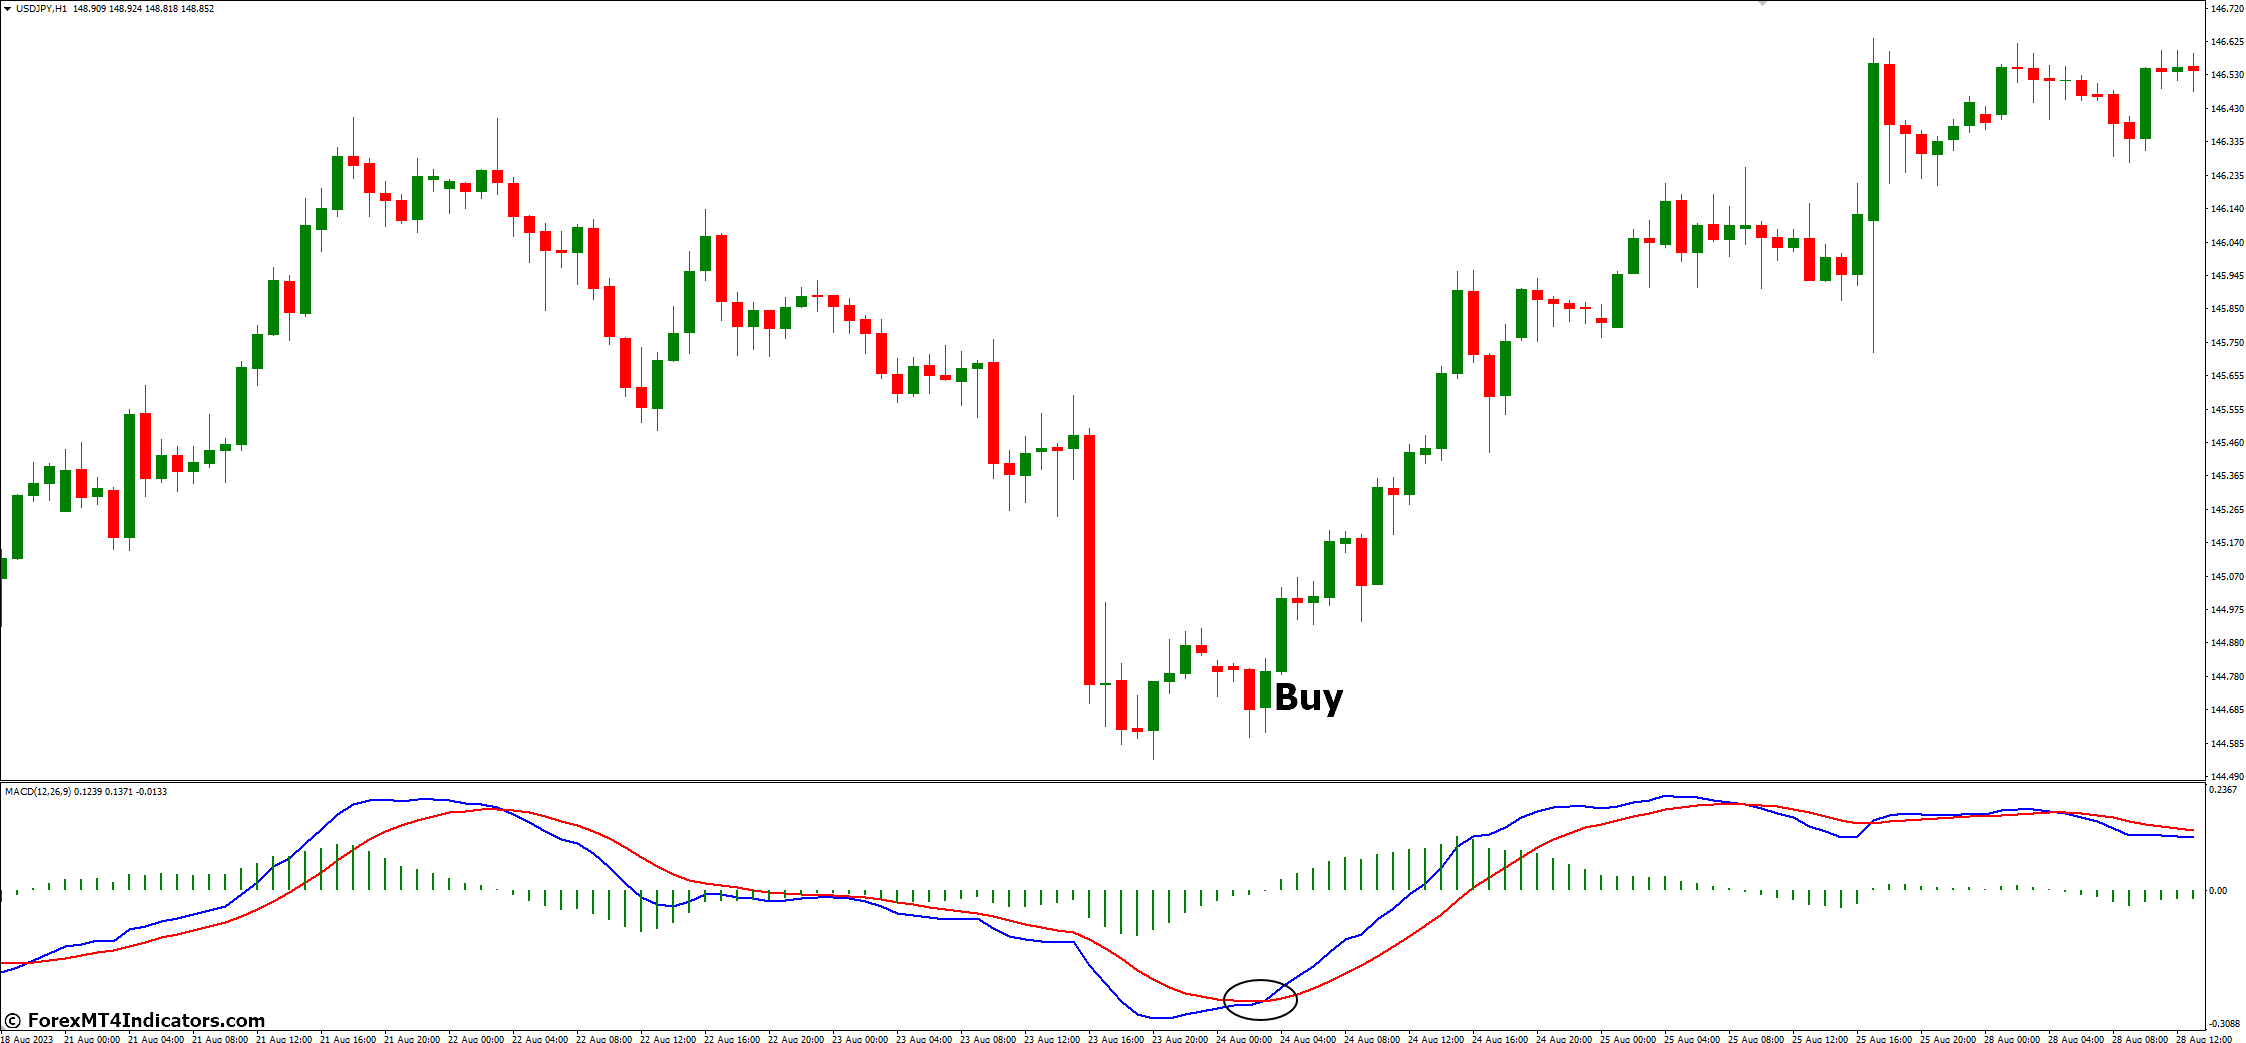 How to Spot Buy and Sell Signals with MACD - Bullish Signals